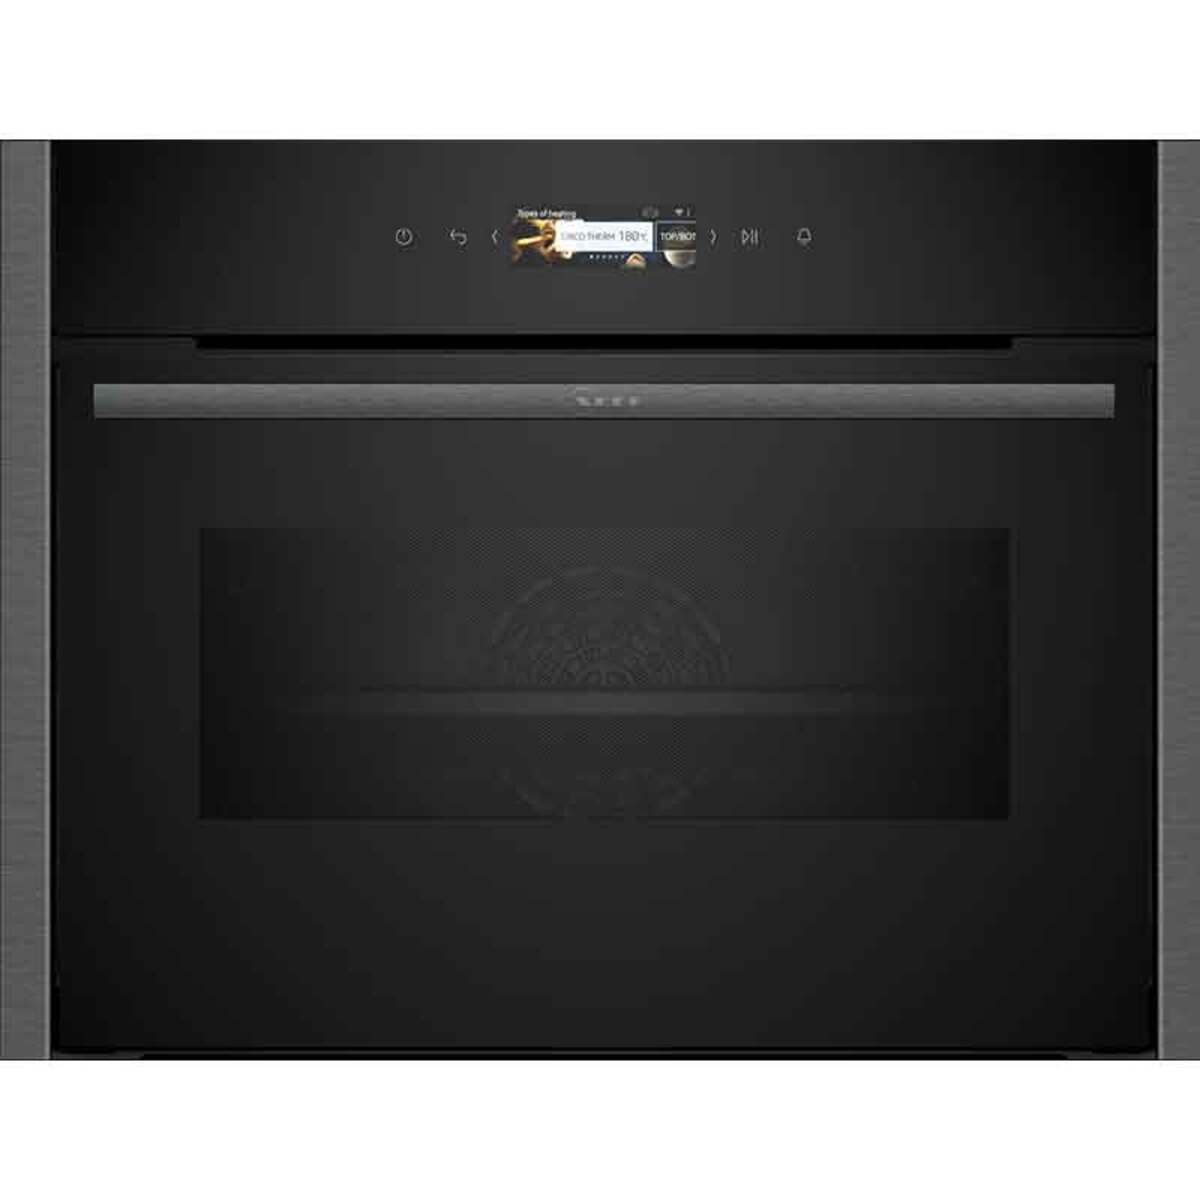 Image of NEFF C24MR21G0B Built-in compact Oven with Microwave Function